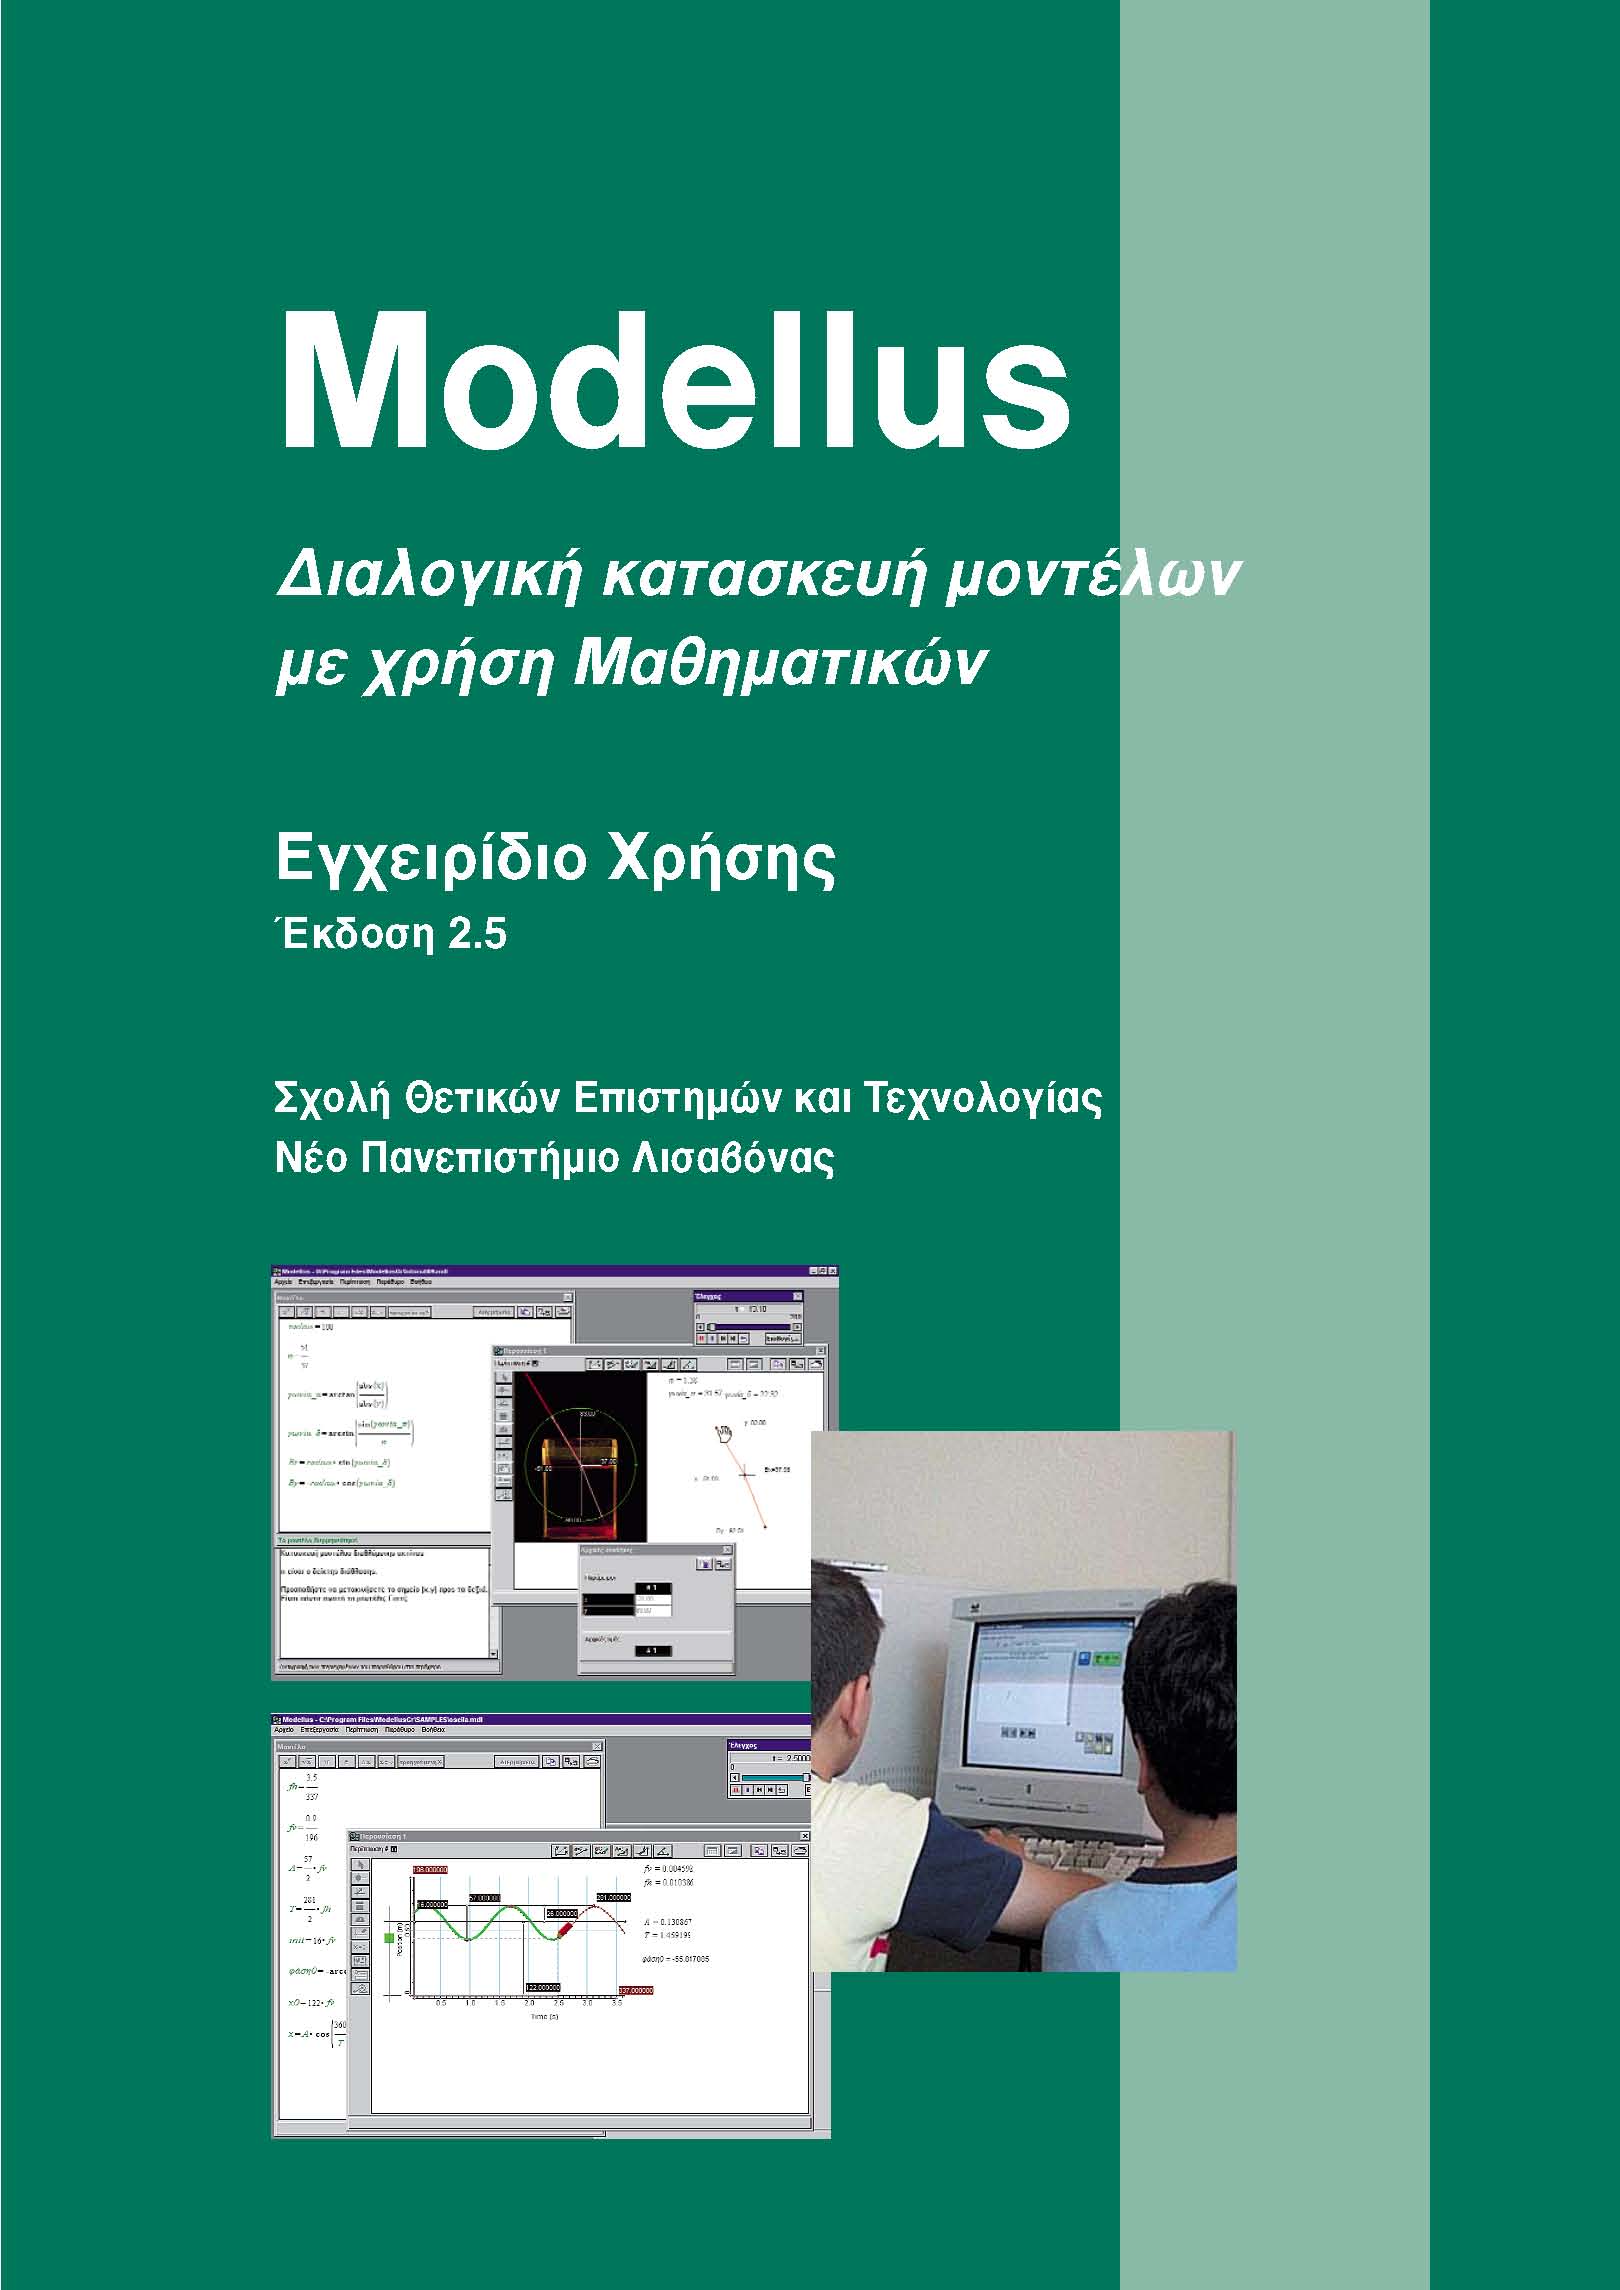 Pages from manual modellus